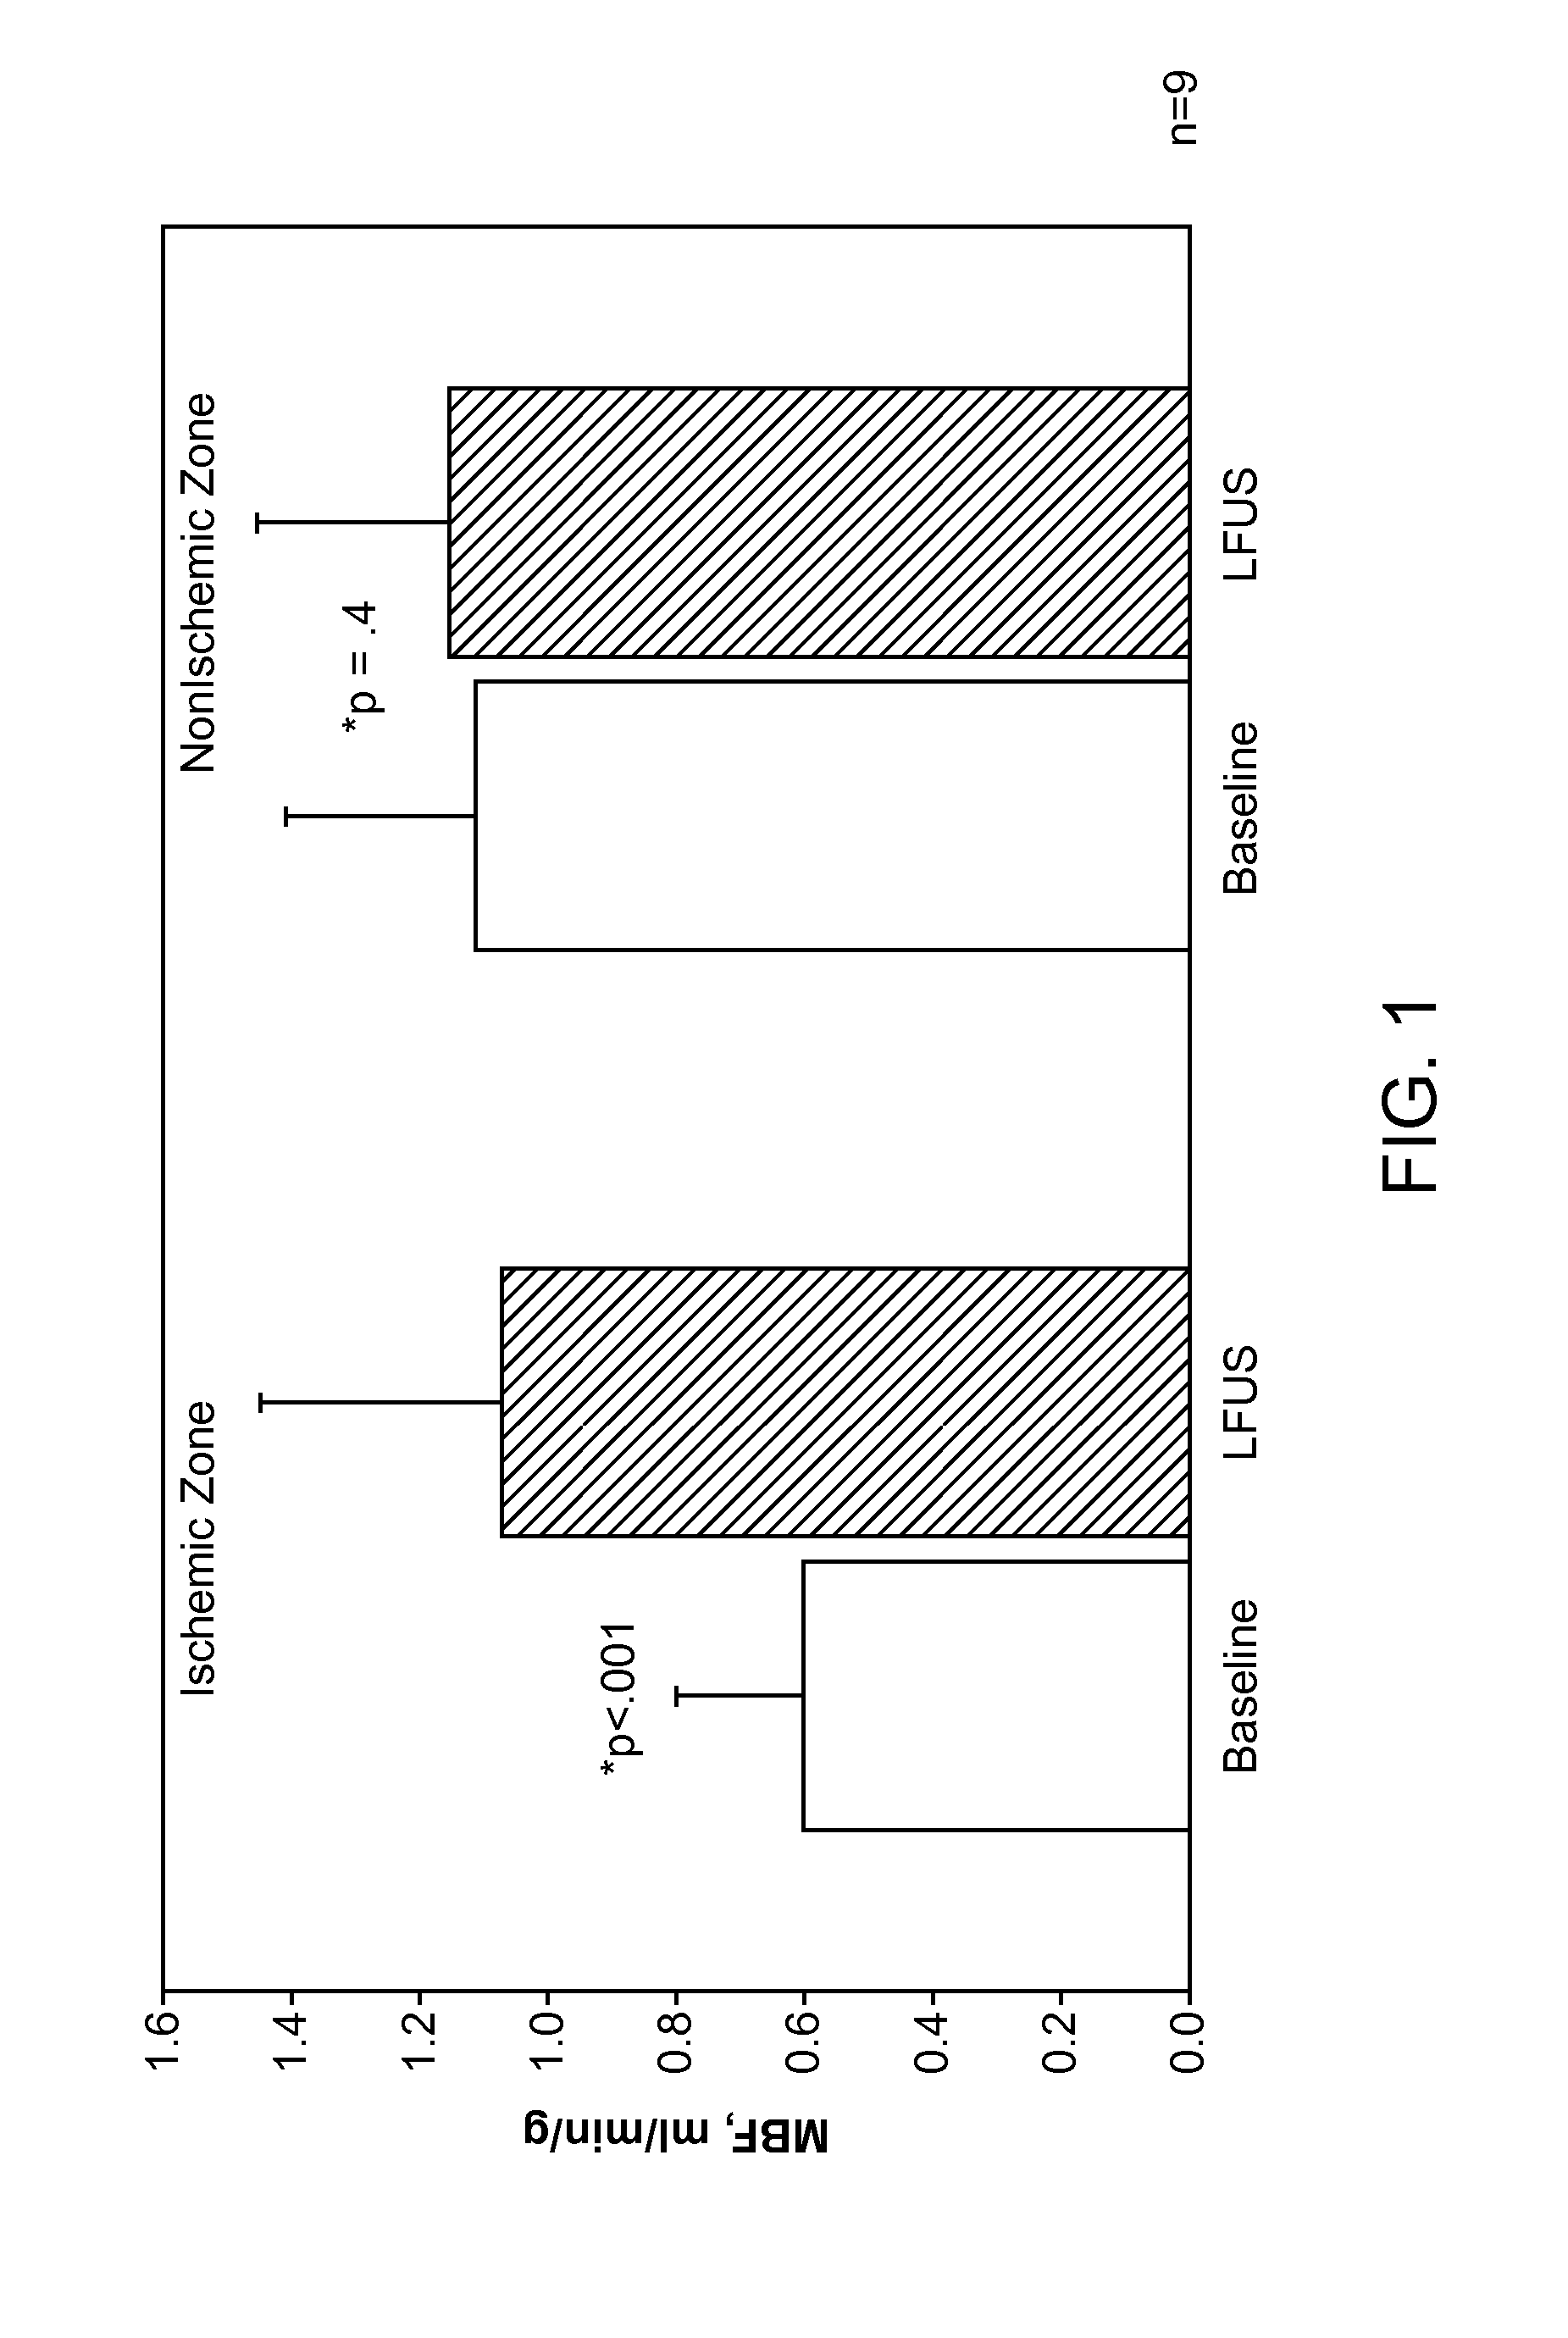 Renal Injury Inhibiting Devices, Systems, and Methods Employing Low-Frequency Ultrasound or Other Cyclical Pressure Energies